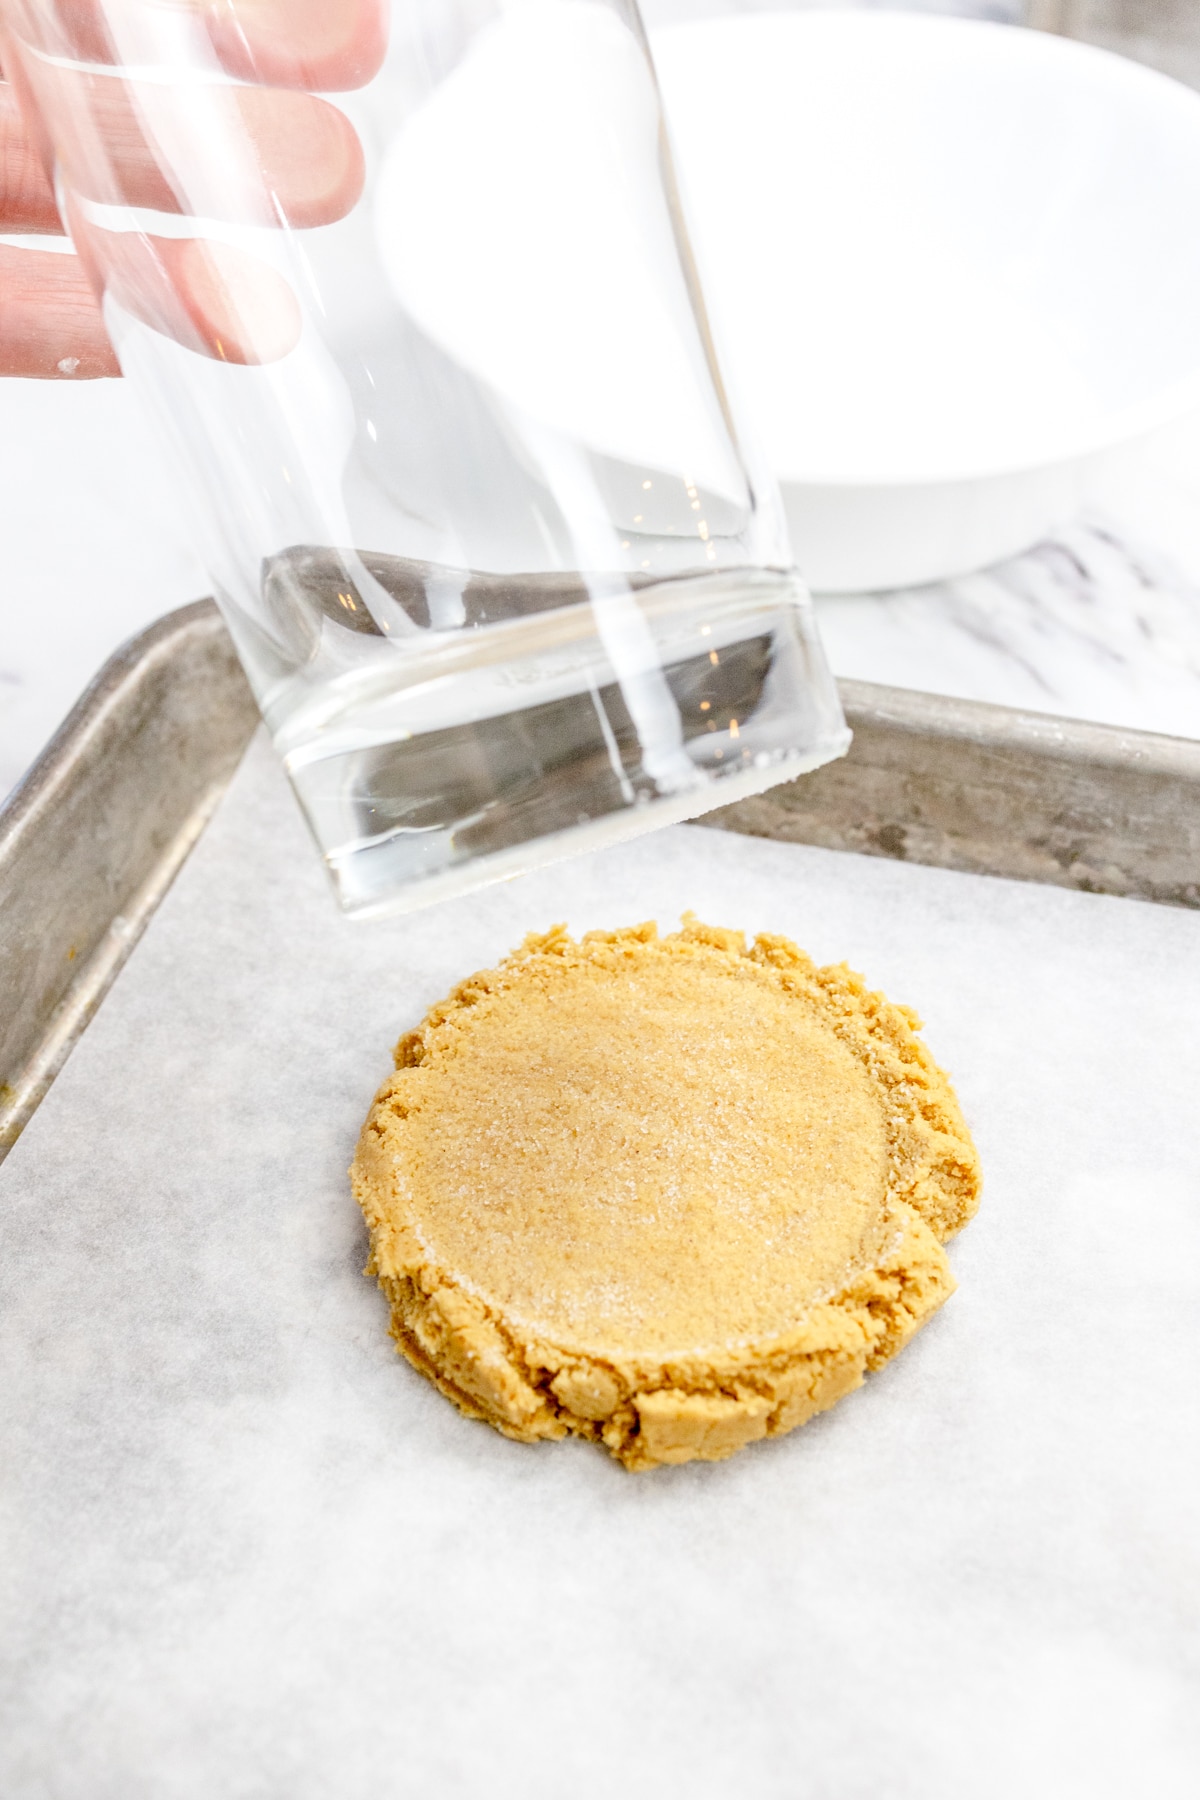 Close up of a drink glass pressing a scoop of cookie dough flat on a baking tray lined with parchment paper.